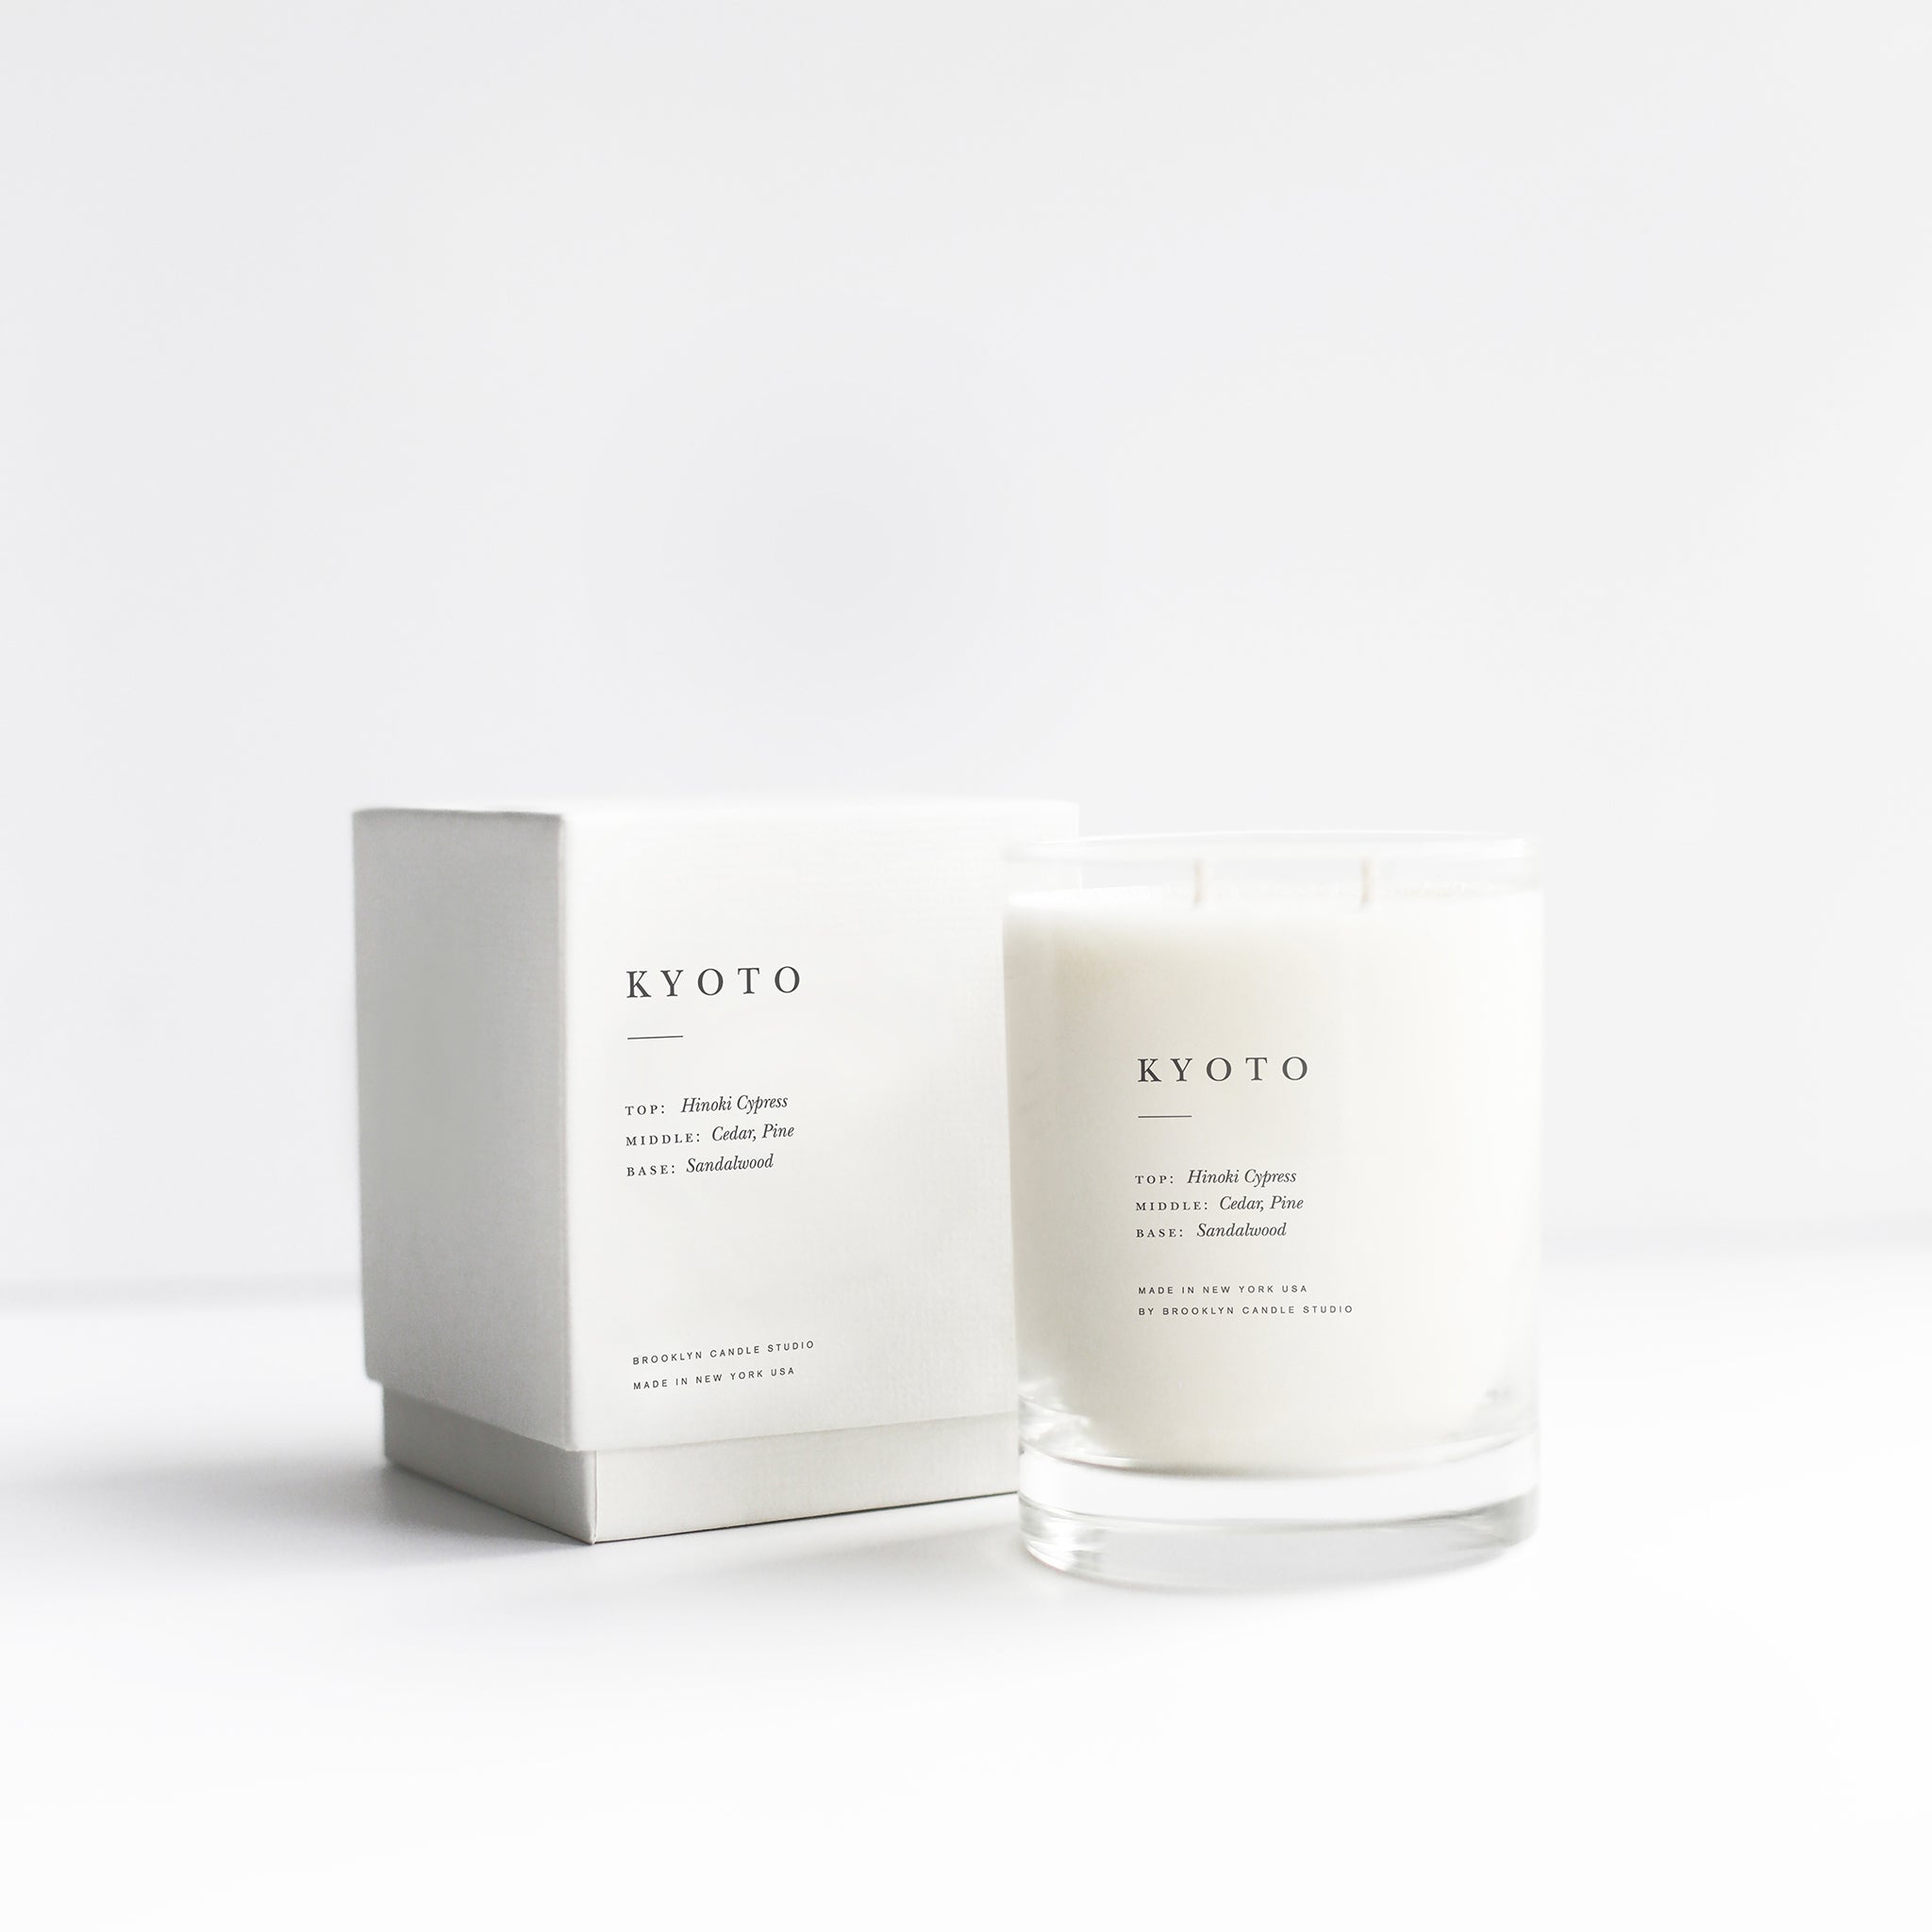 Brooklyn Candle Studio scented candle Kyoto series Escapist. A romantic homage to Kyoto in the rain, green avenues and Japanese wooden architecture. This wonderful scented candle is a meditative, calming composition of Hinoki cypress, cedar, sandalwood, vetiver and pine. Hand-poured with 100% soy wax in the small manufactory of Brooklyn Candle Studio.